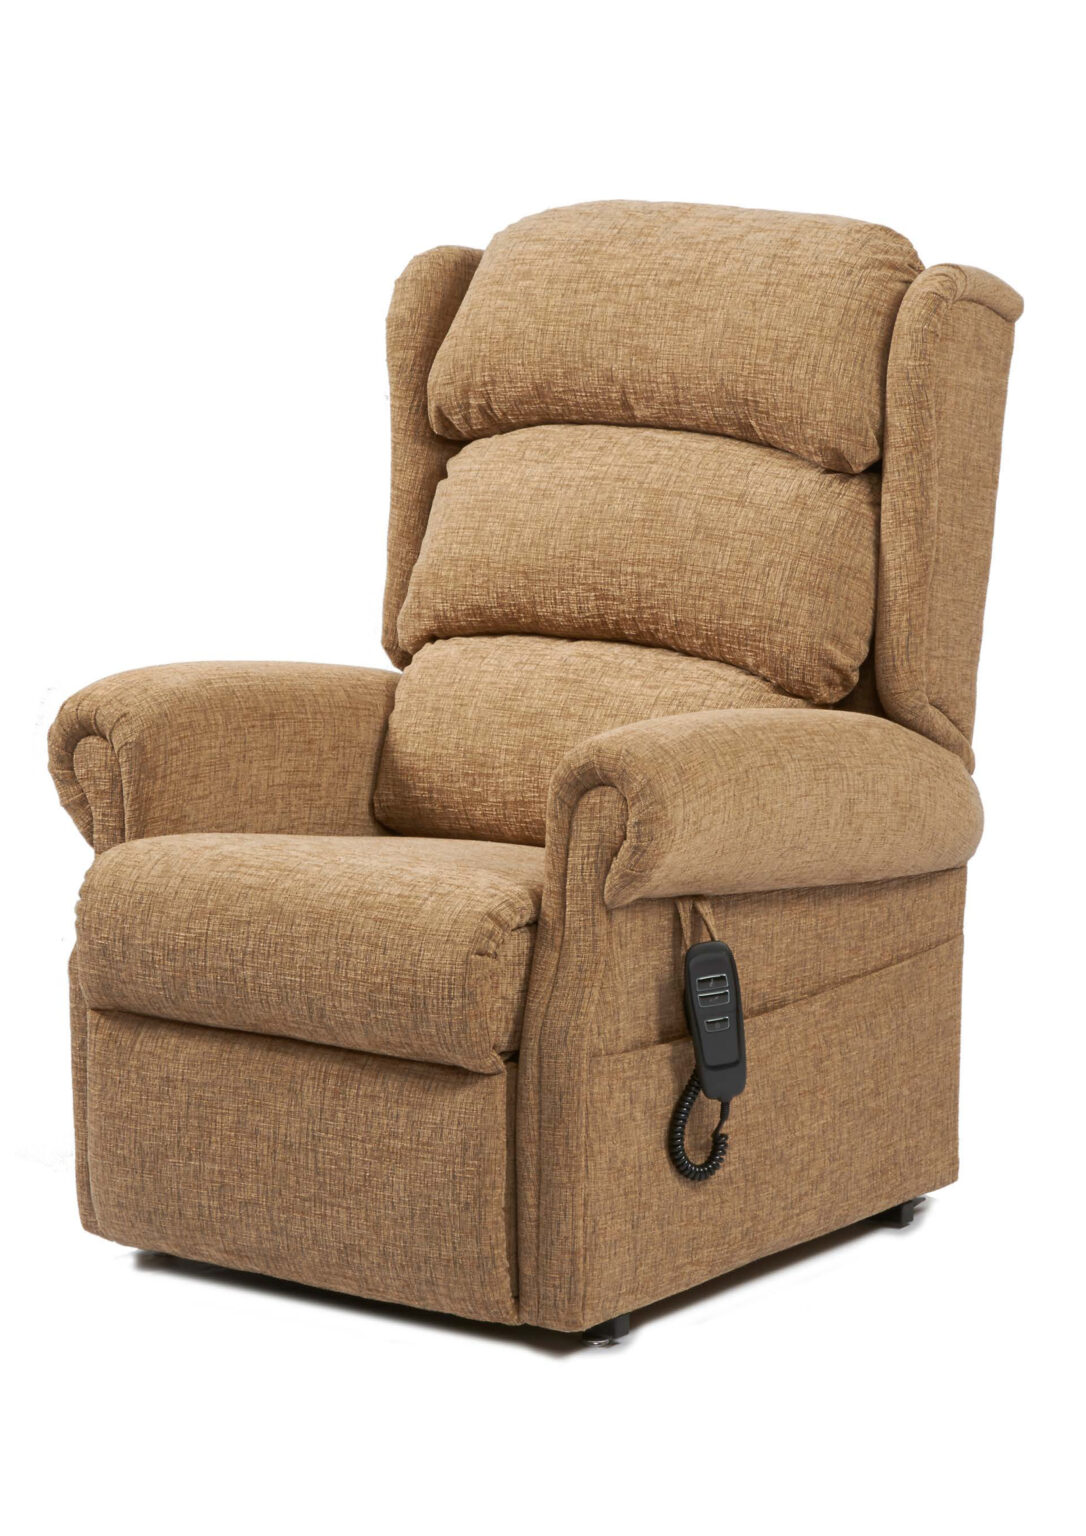 Dales Swaledale Armchair Side View - Rise Recline Chair in Montana Plain Cocoa